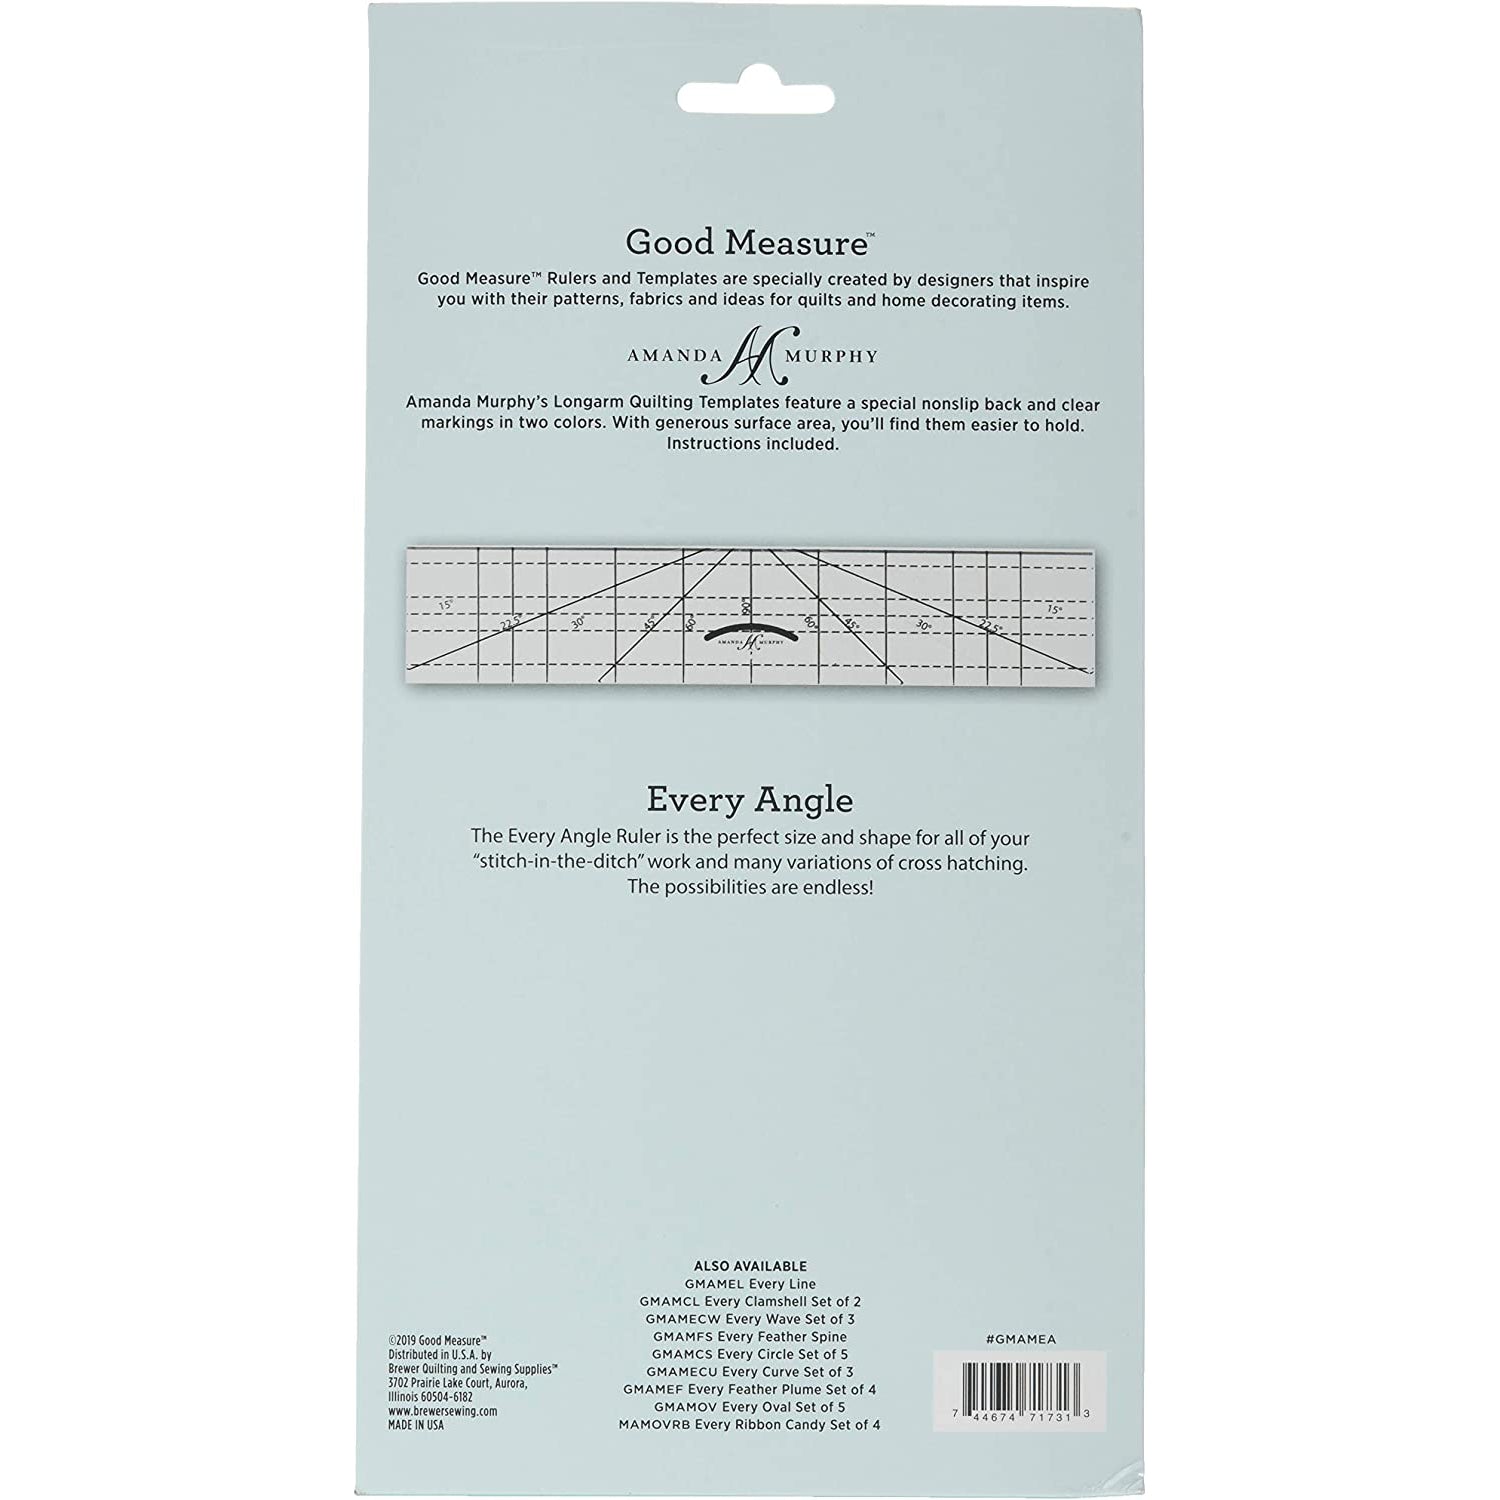 Good Measure Every Angle Quilting Ruler for Longarm Machines